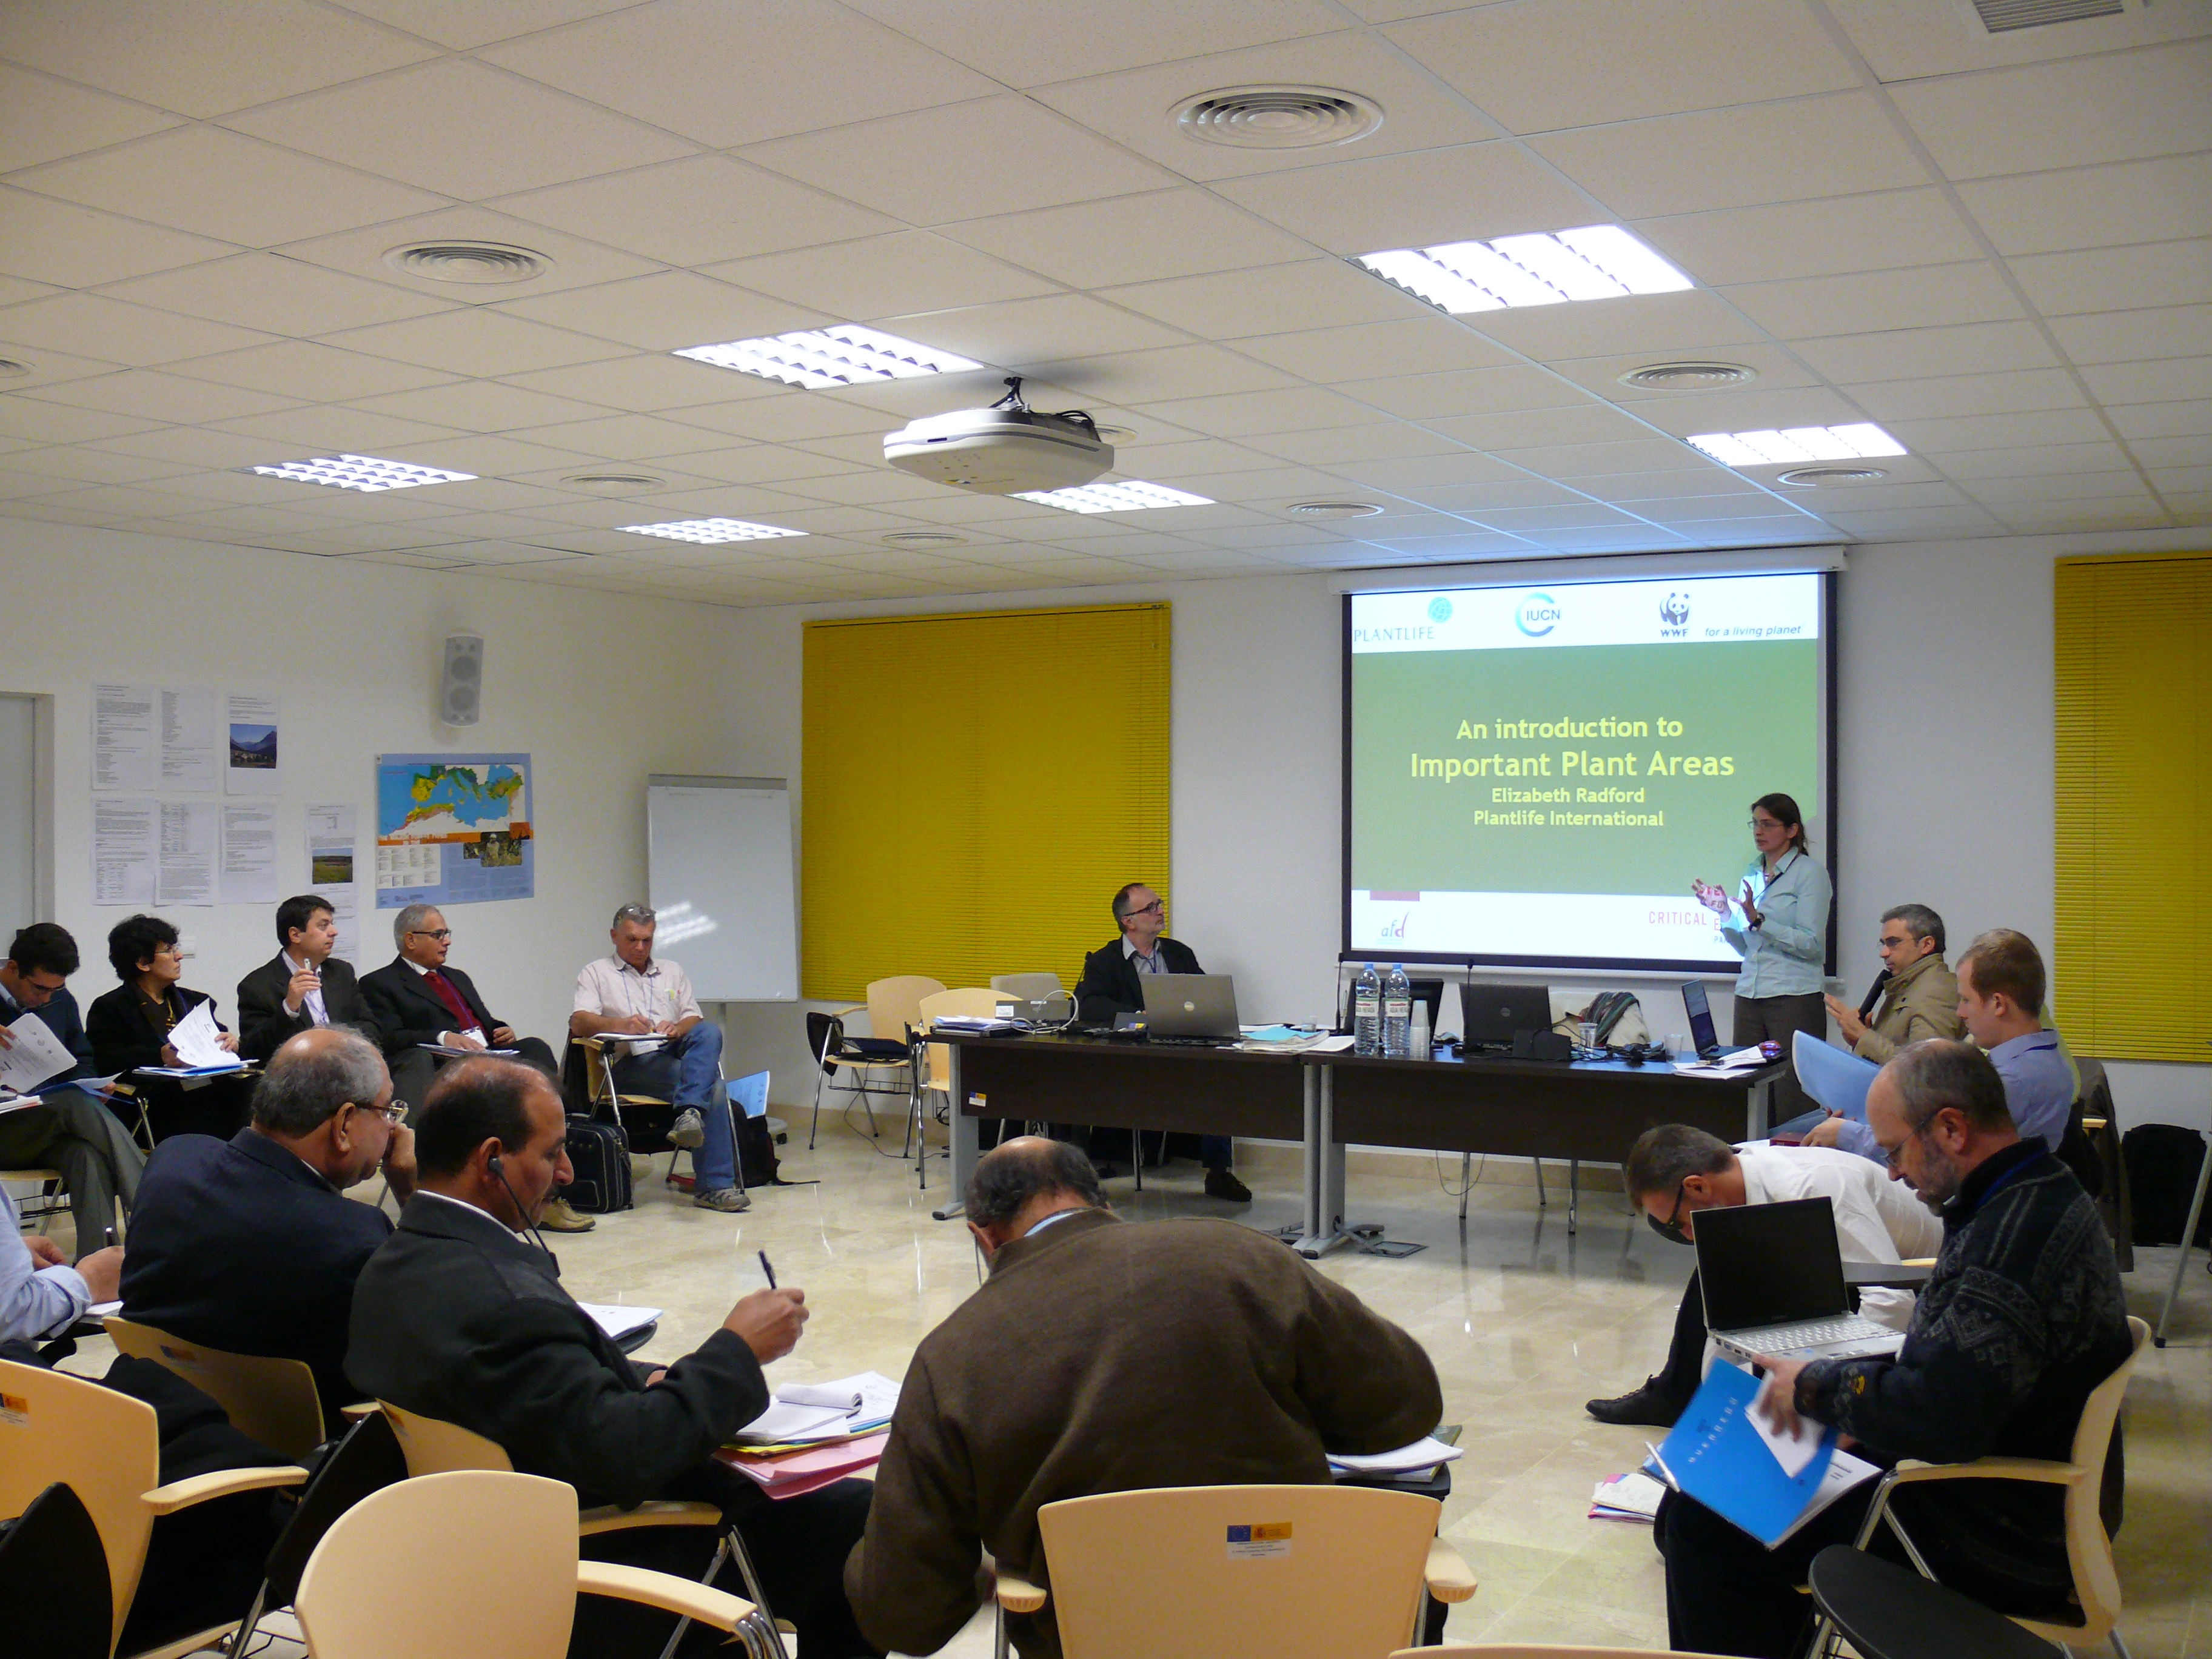 Participants at the IPAs workshop in Malaga - December 2009